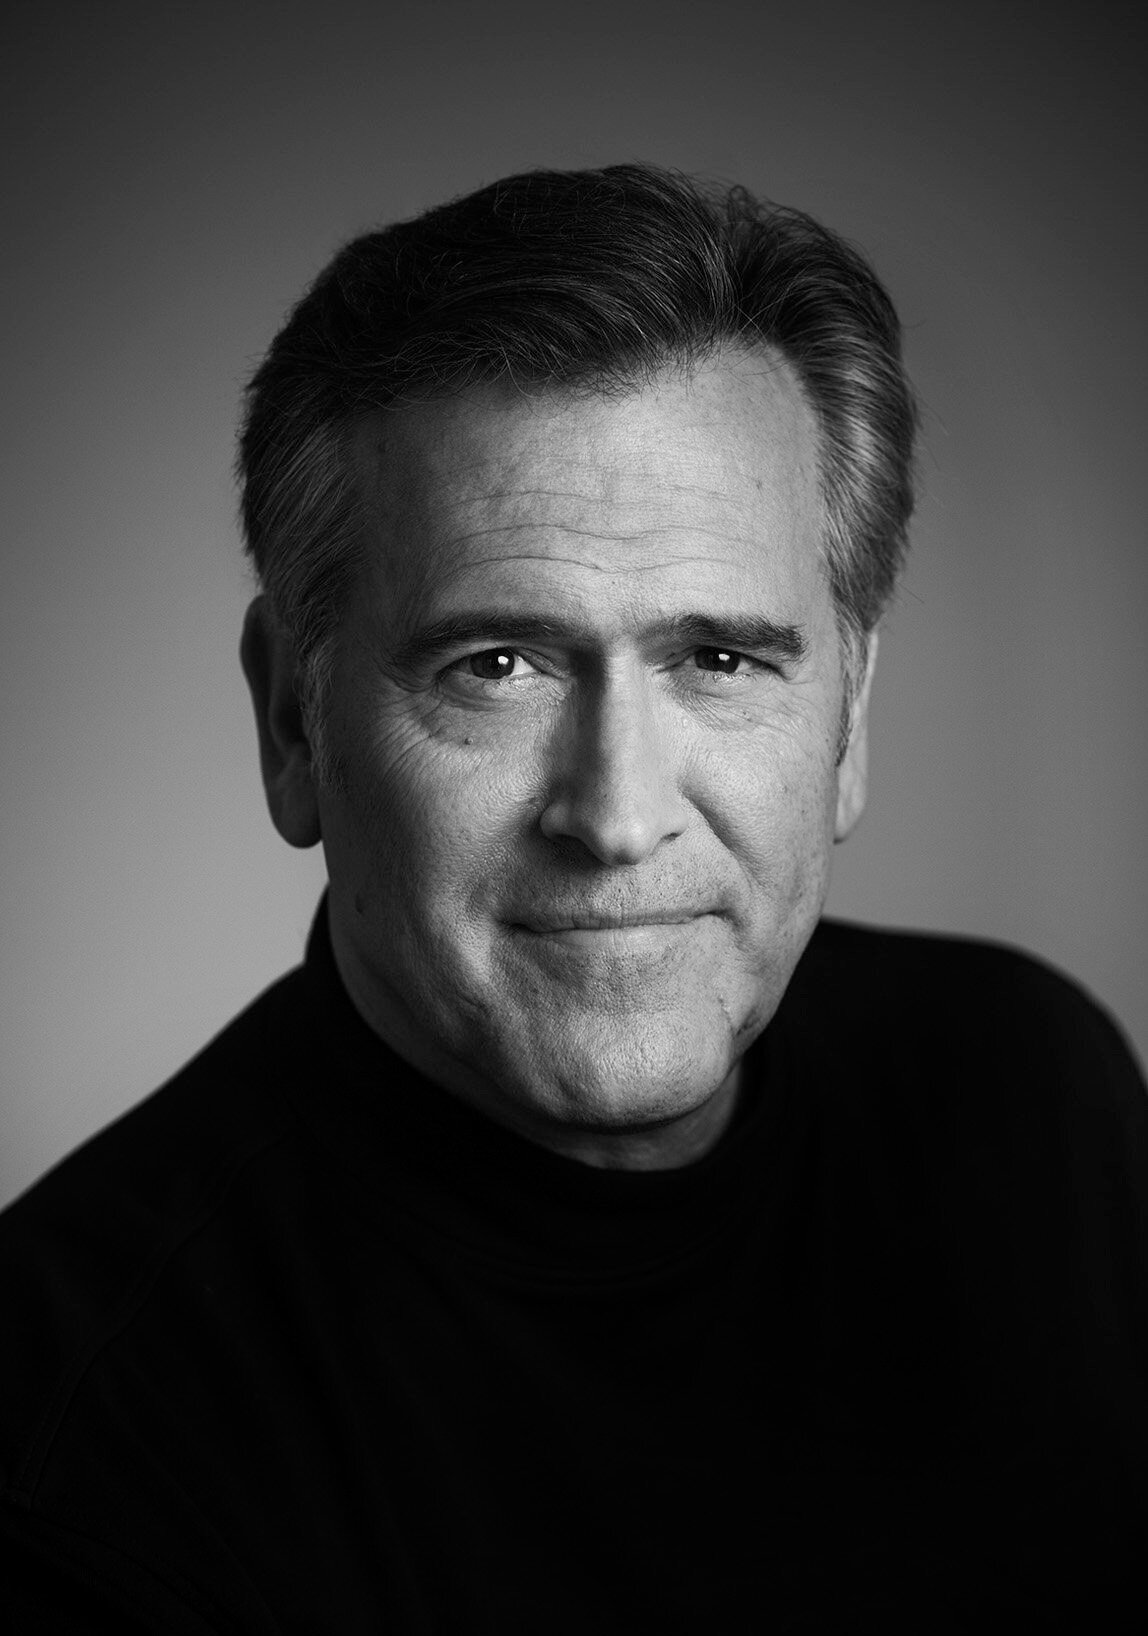  Bruce Campbell / Actor &amp; Writer  